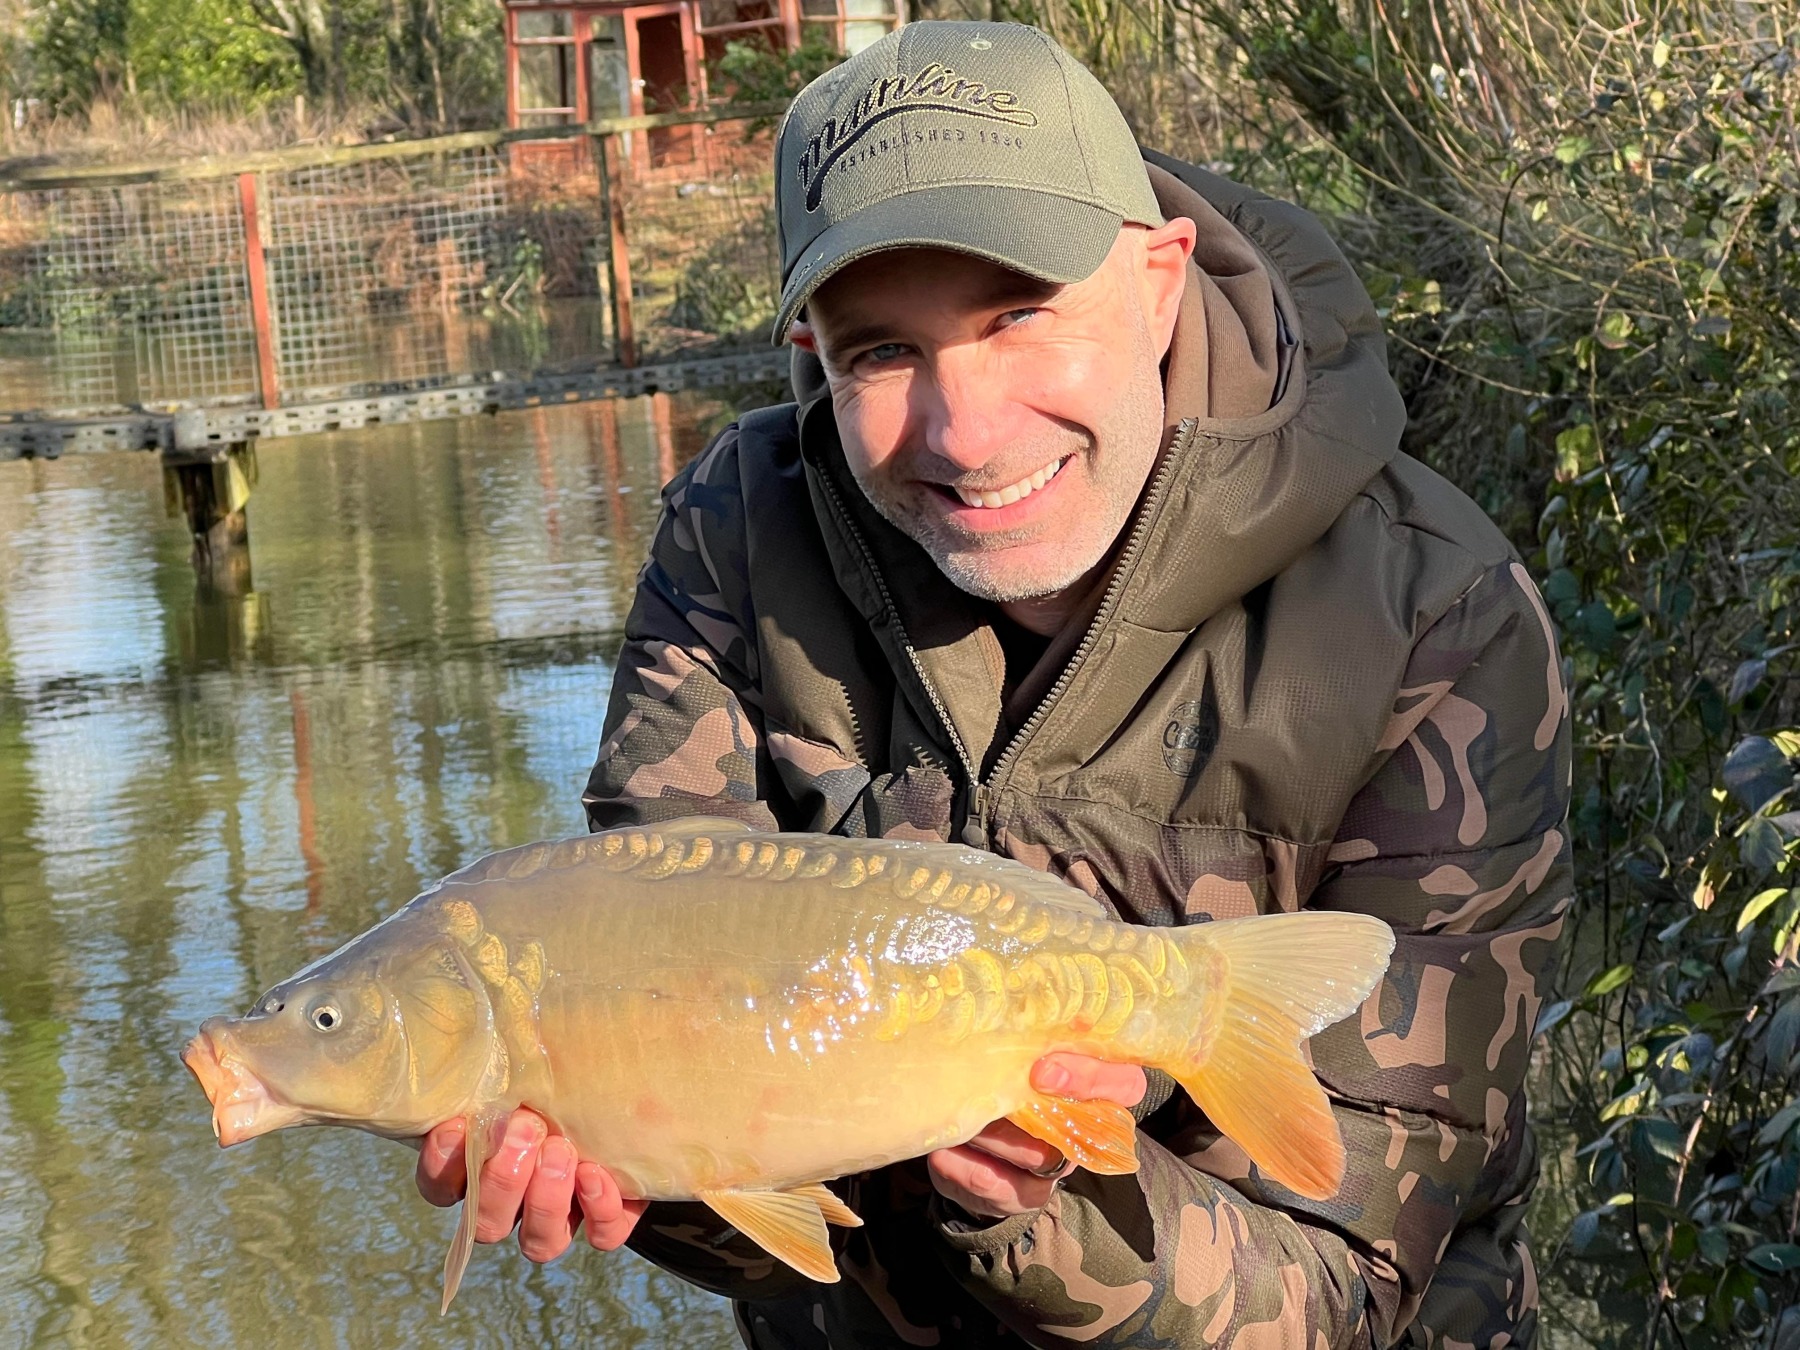 My first carp after a very long winter – and boy was I happy!